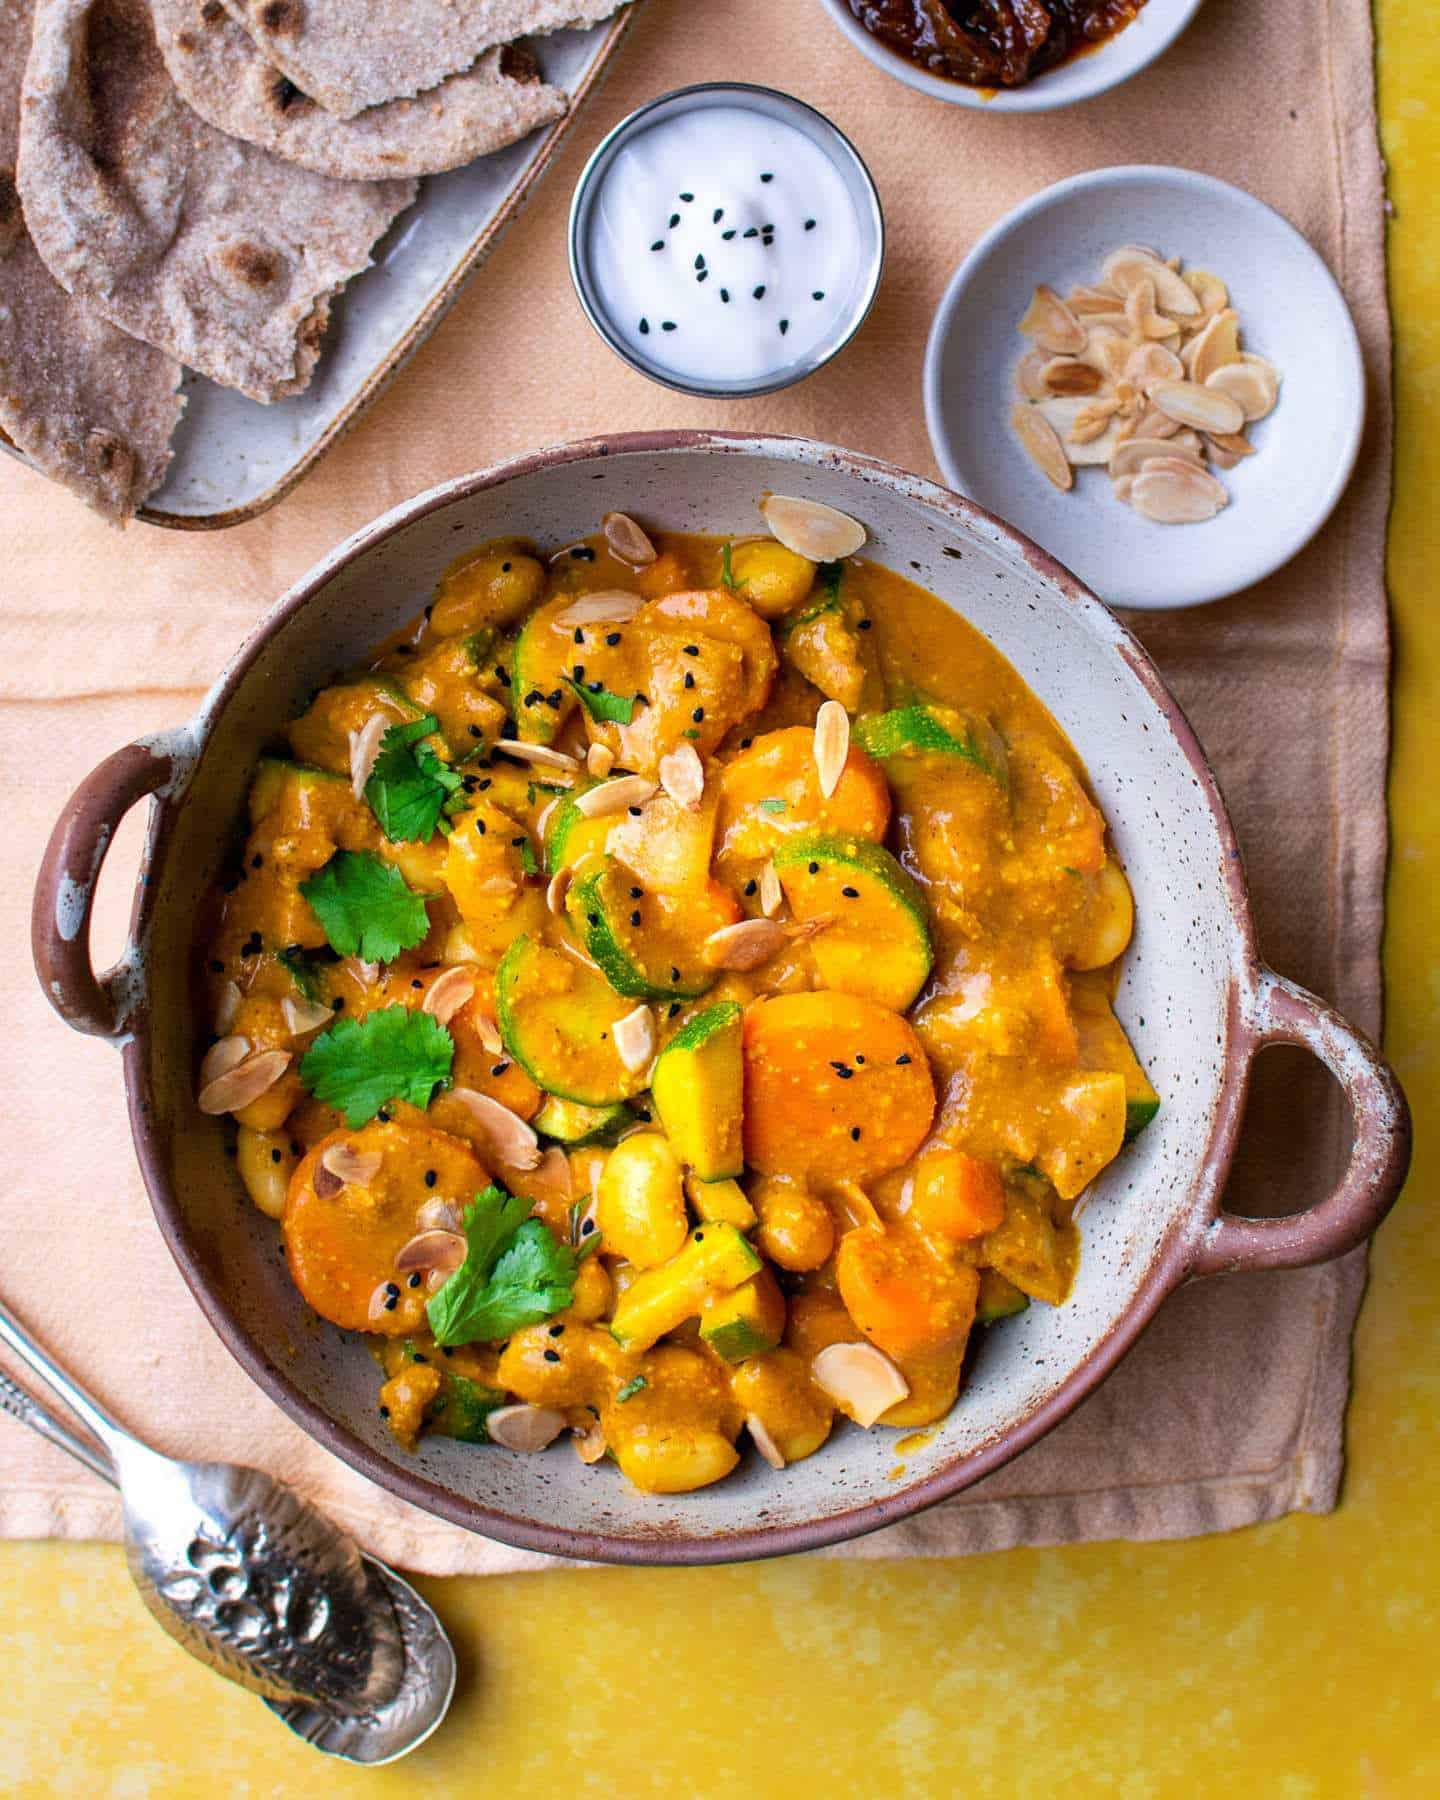 A vegan curry with butter beans, courgette and carrots in an orange creamy sauce, served in a big bowl with two handles and surrounded by yoghurt, flaked almonds and Indian bread